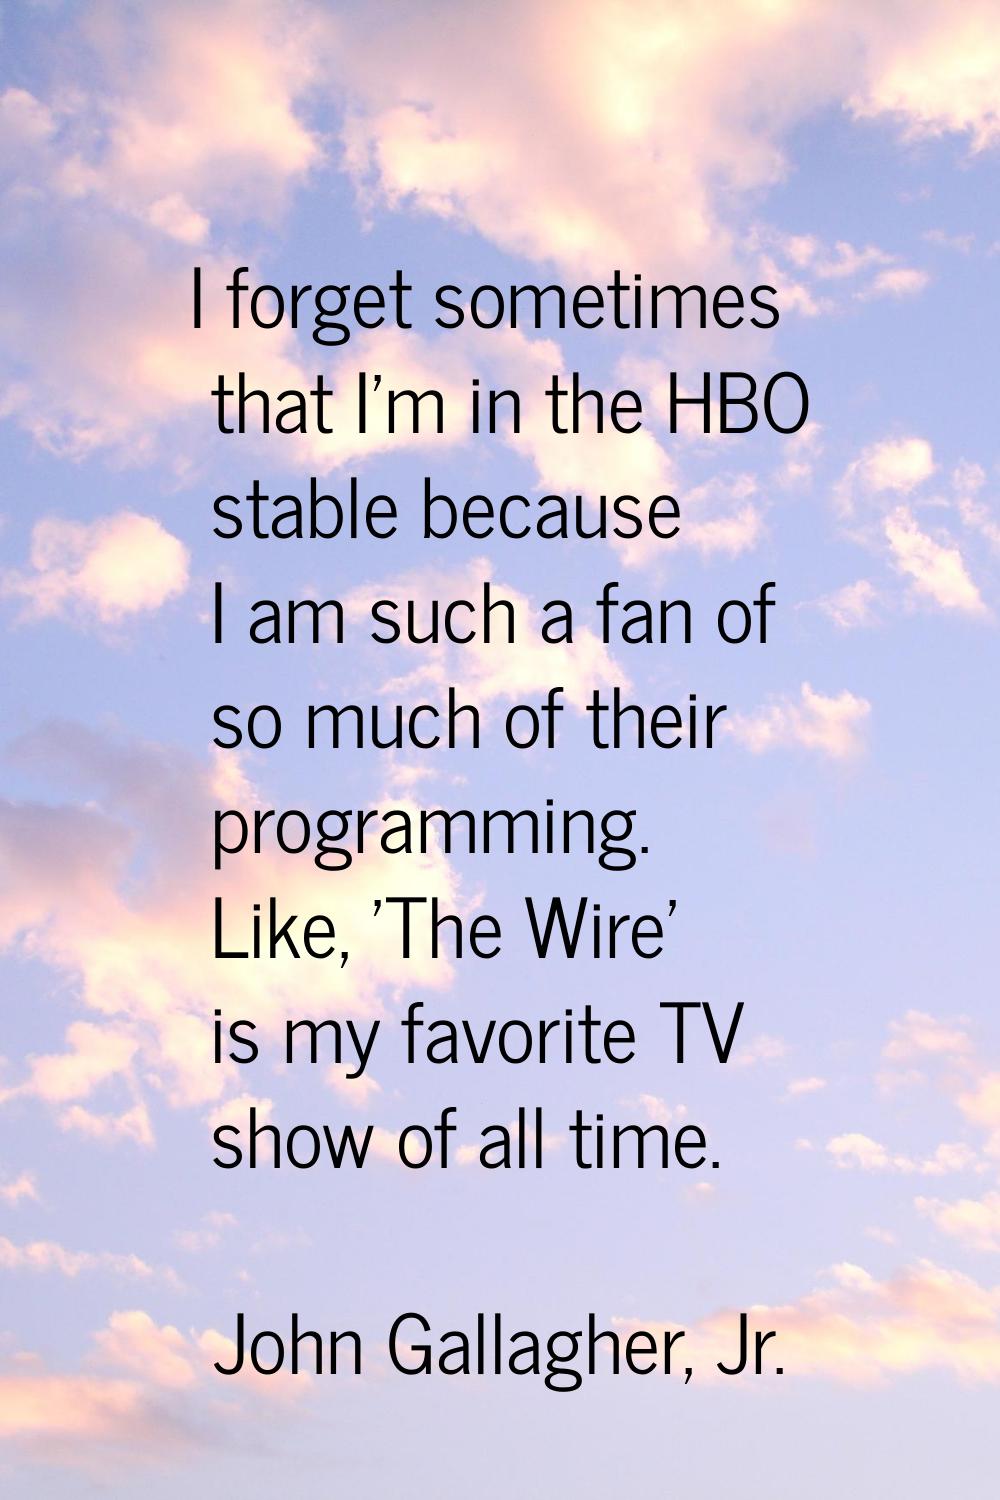 I forget sometimes that I'm in the HBO stable because I am such a fan of so much of their programmi